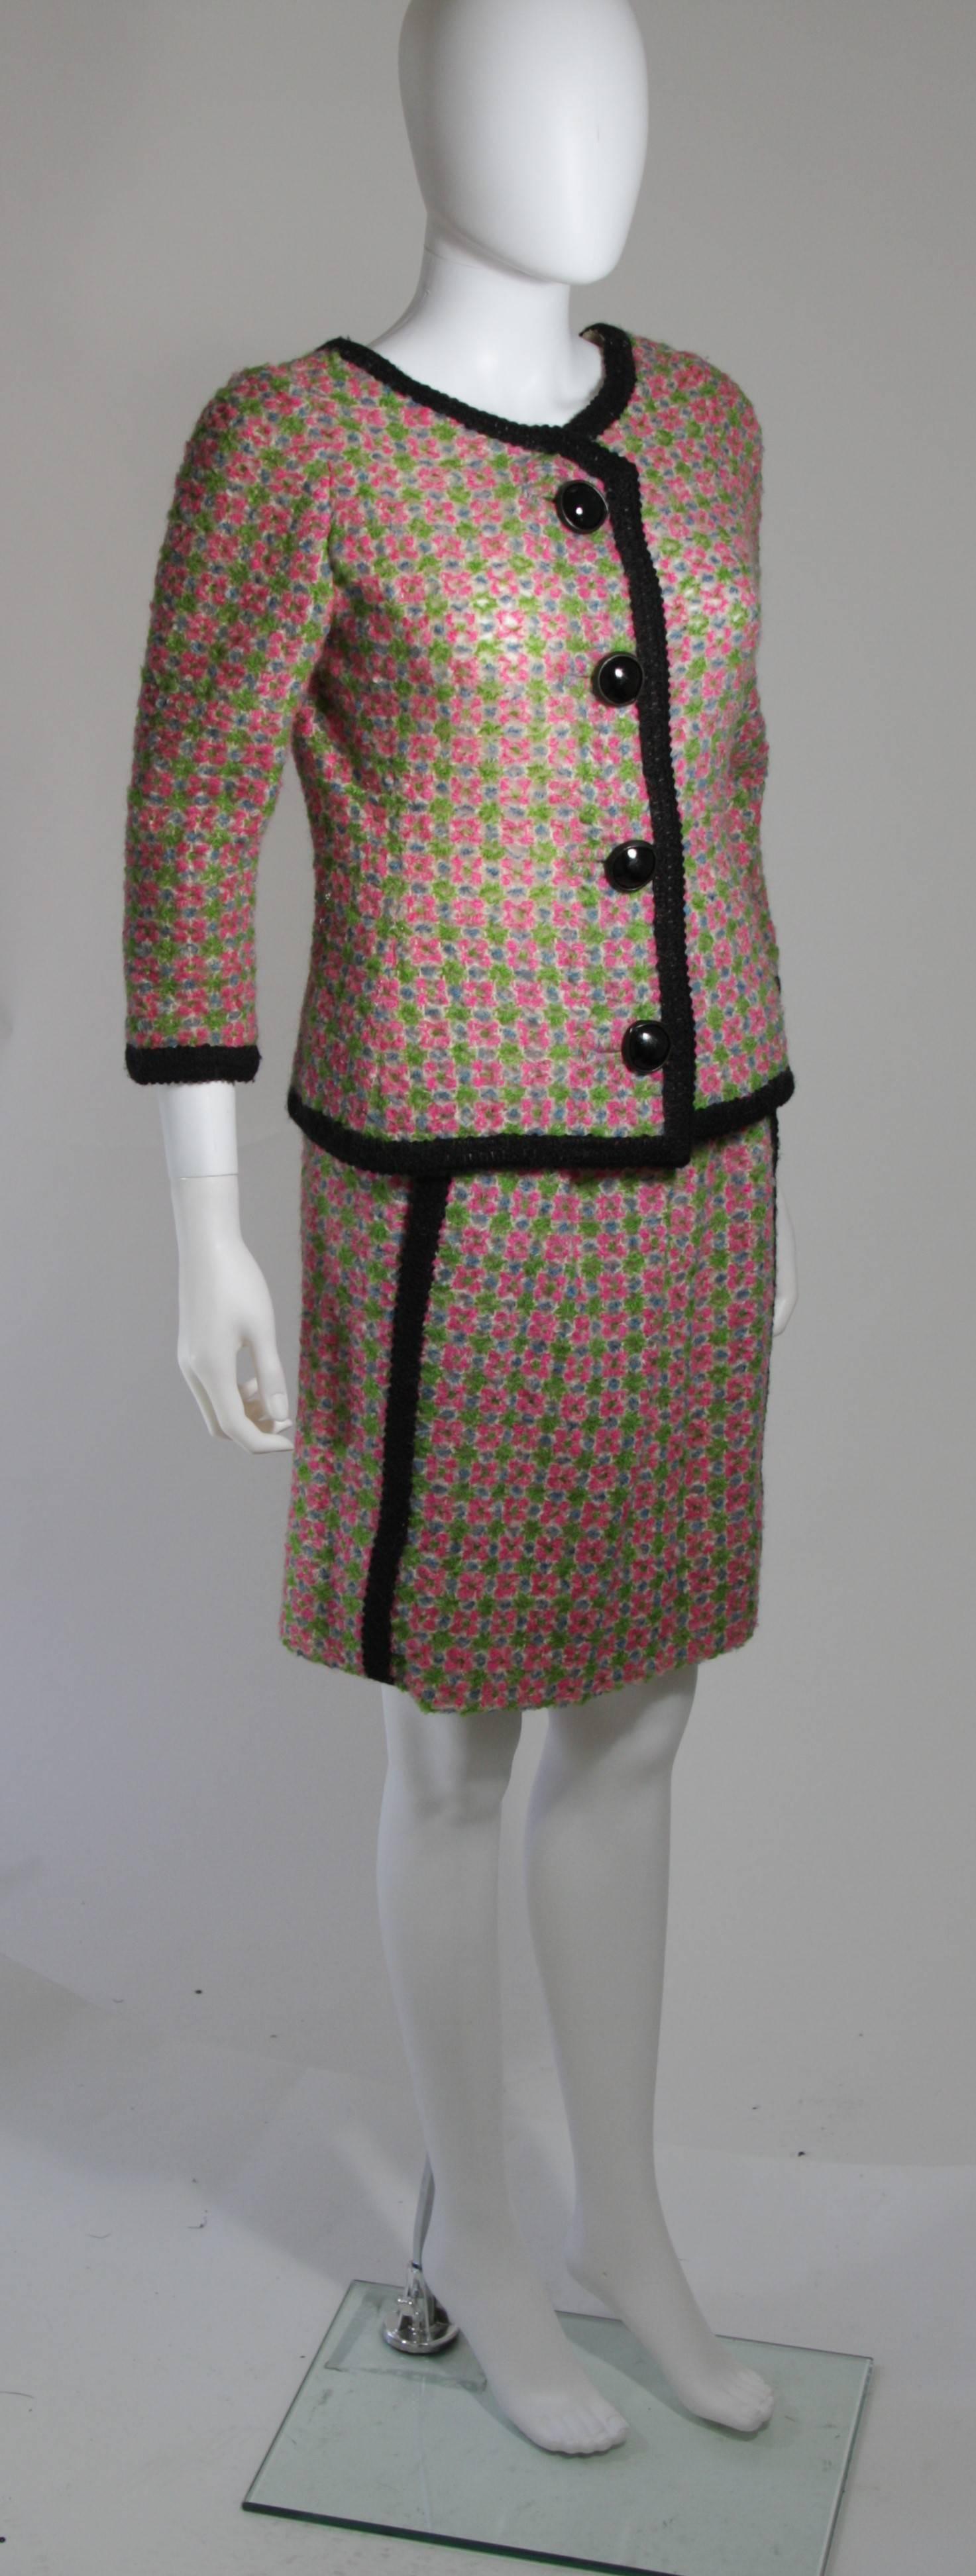 pink and green knit suit